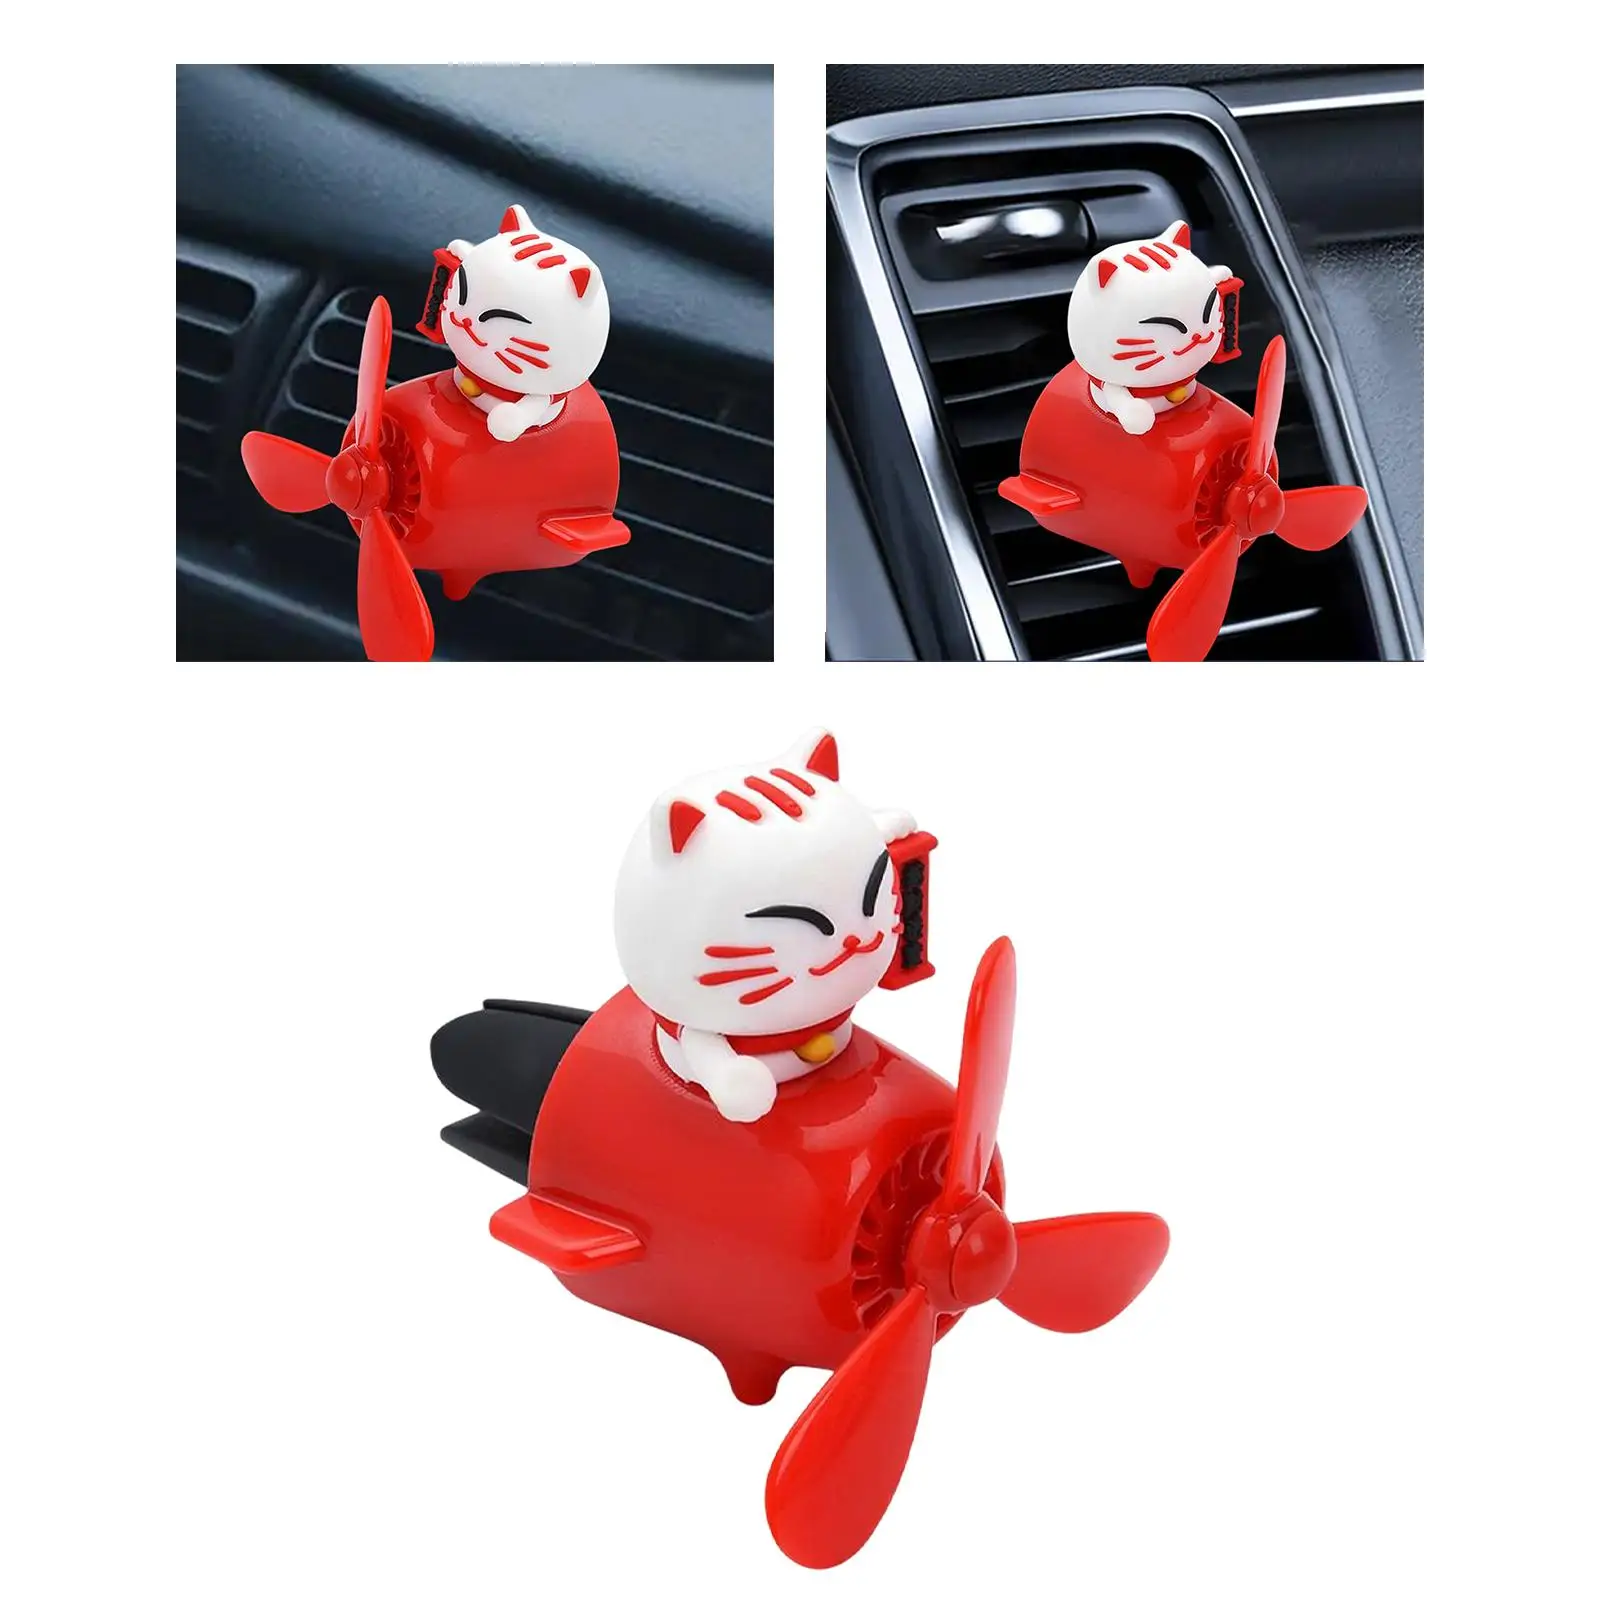 Cat Air Freshener Diffuser Aroma Ornaments Travel Gift Air Outlet Vent for Truck Desk Ornaments Vehicle Automotive